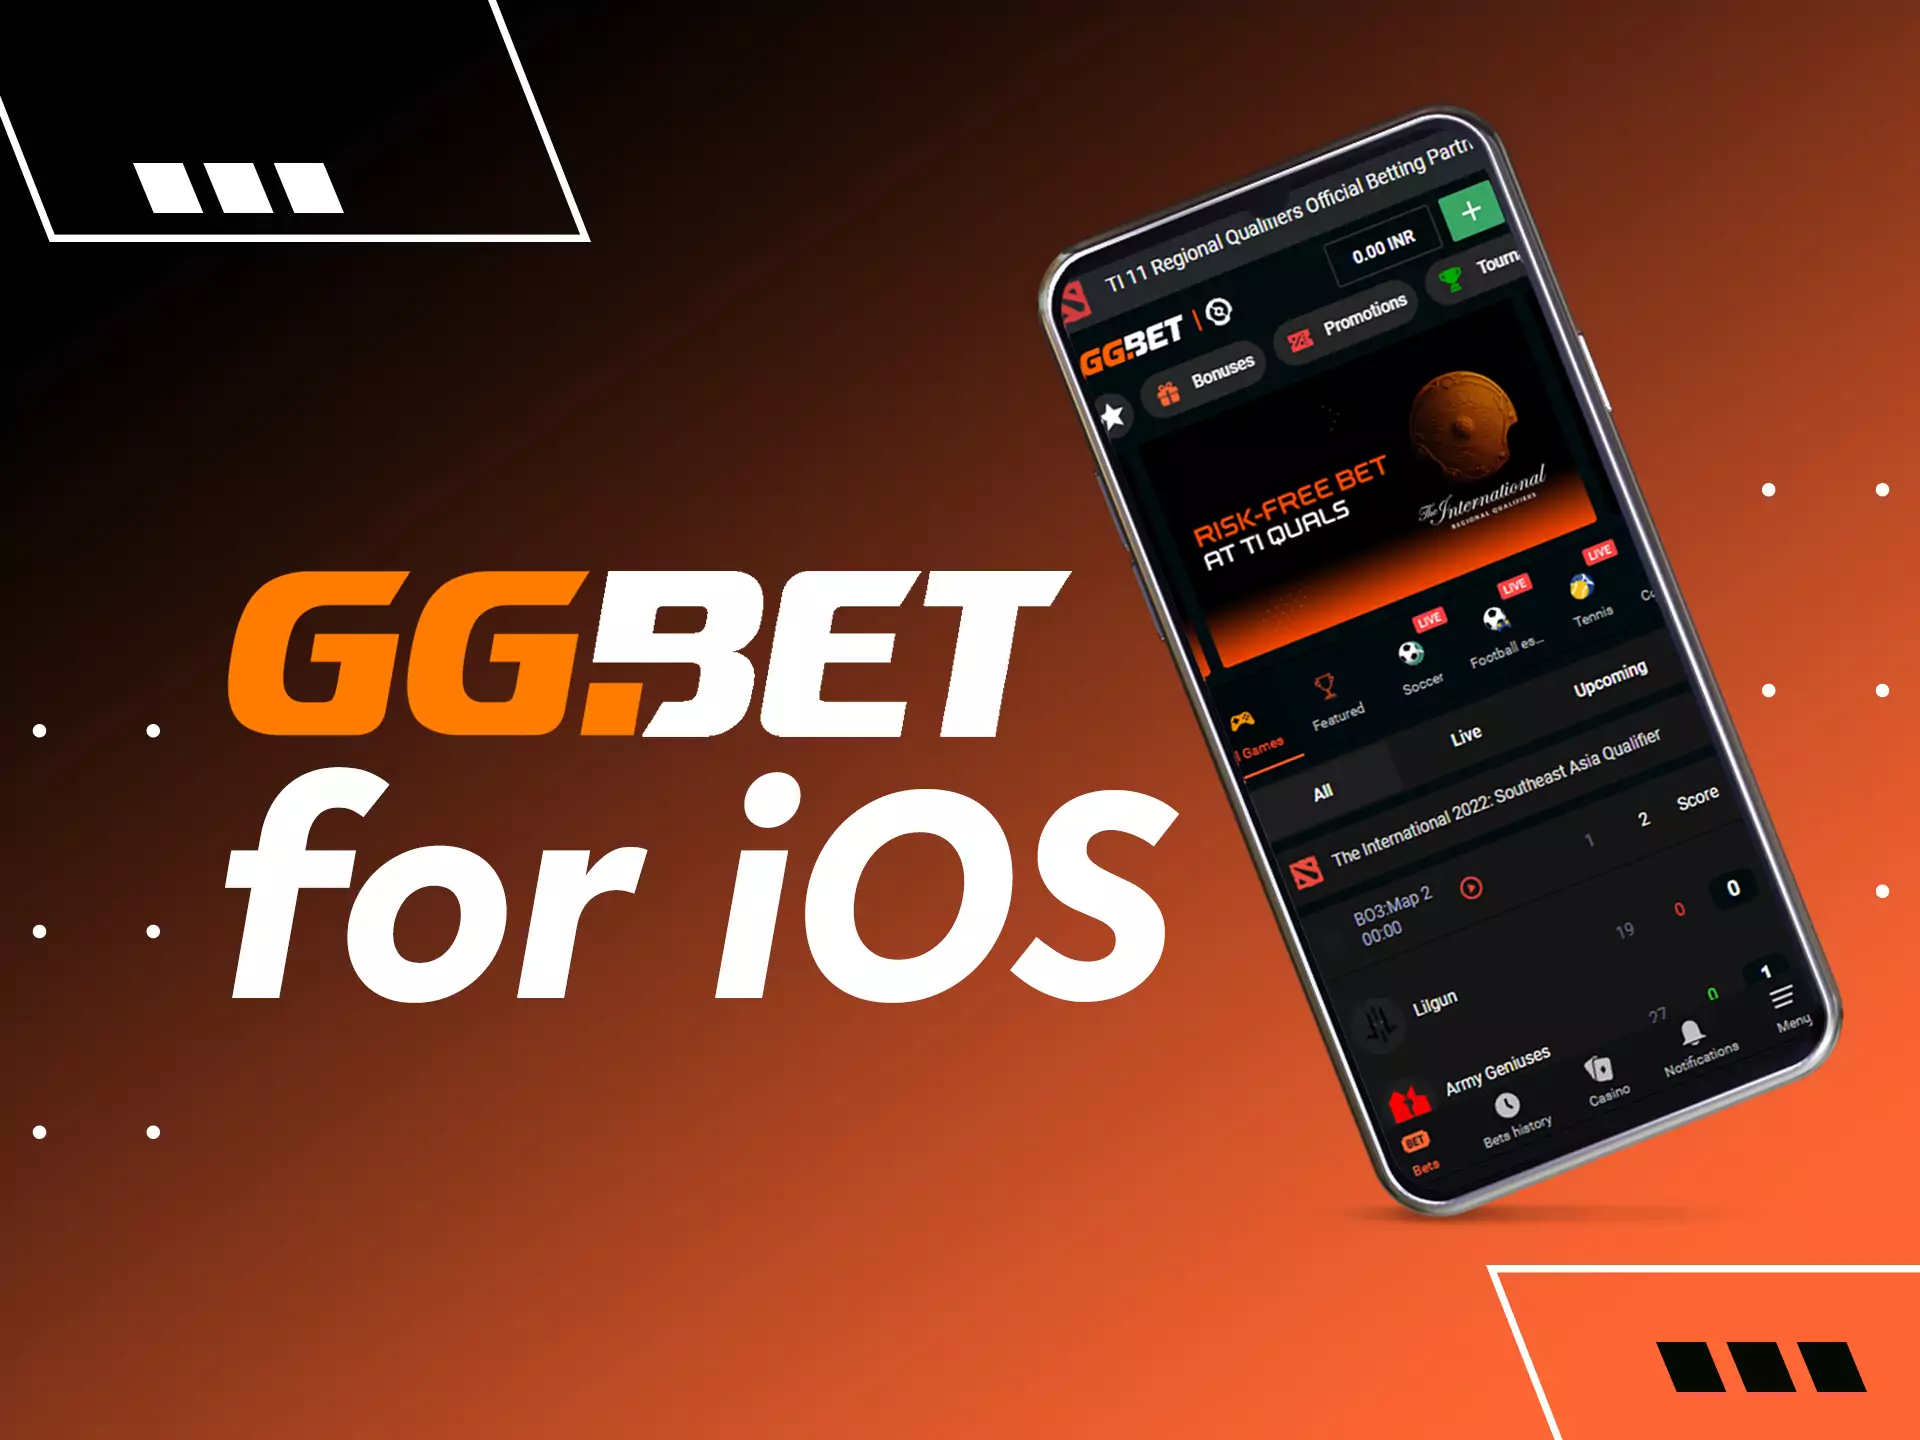 iOS owners can bet on GGBet using a mobile website version.